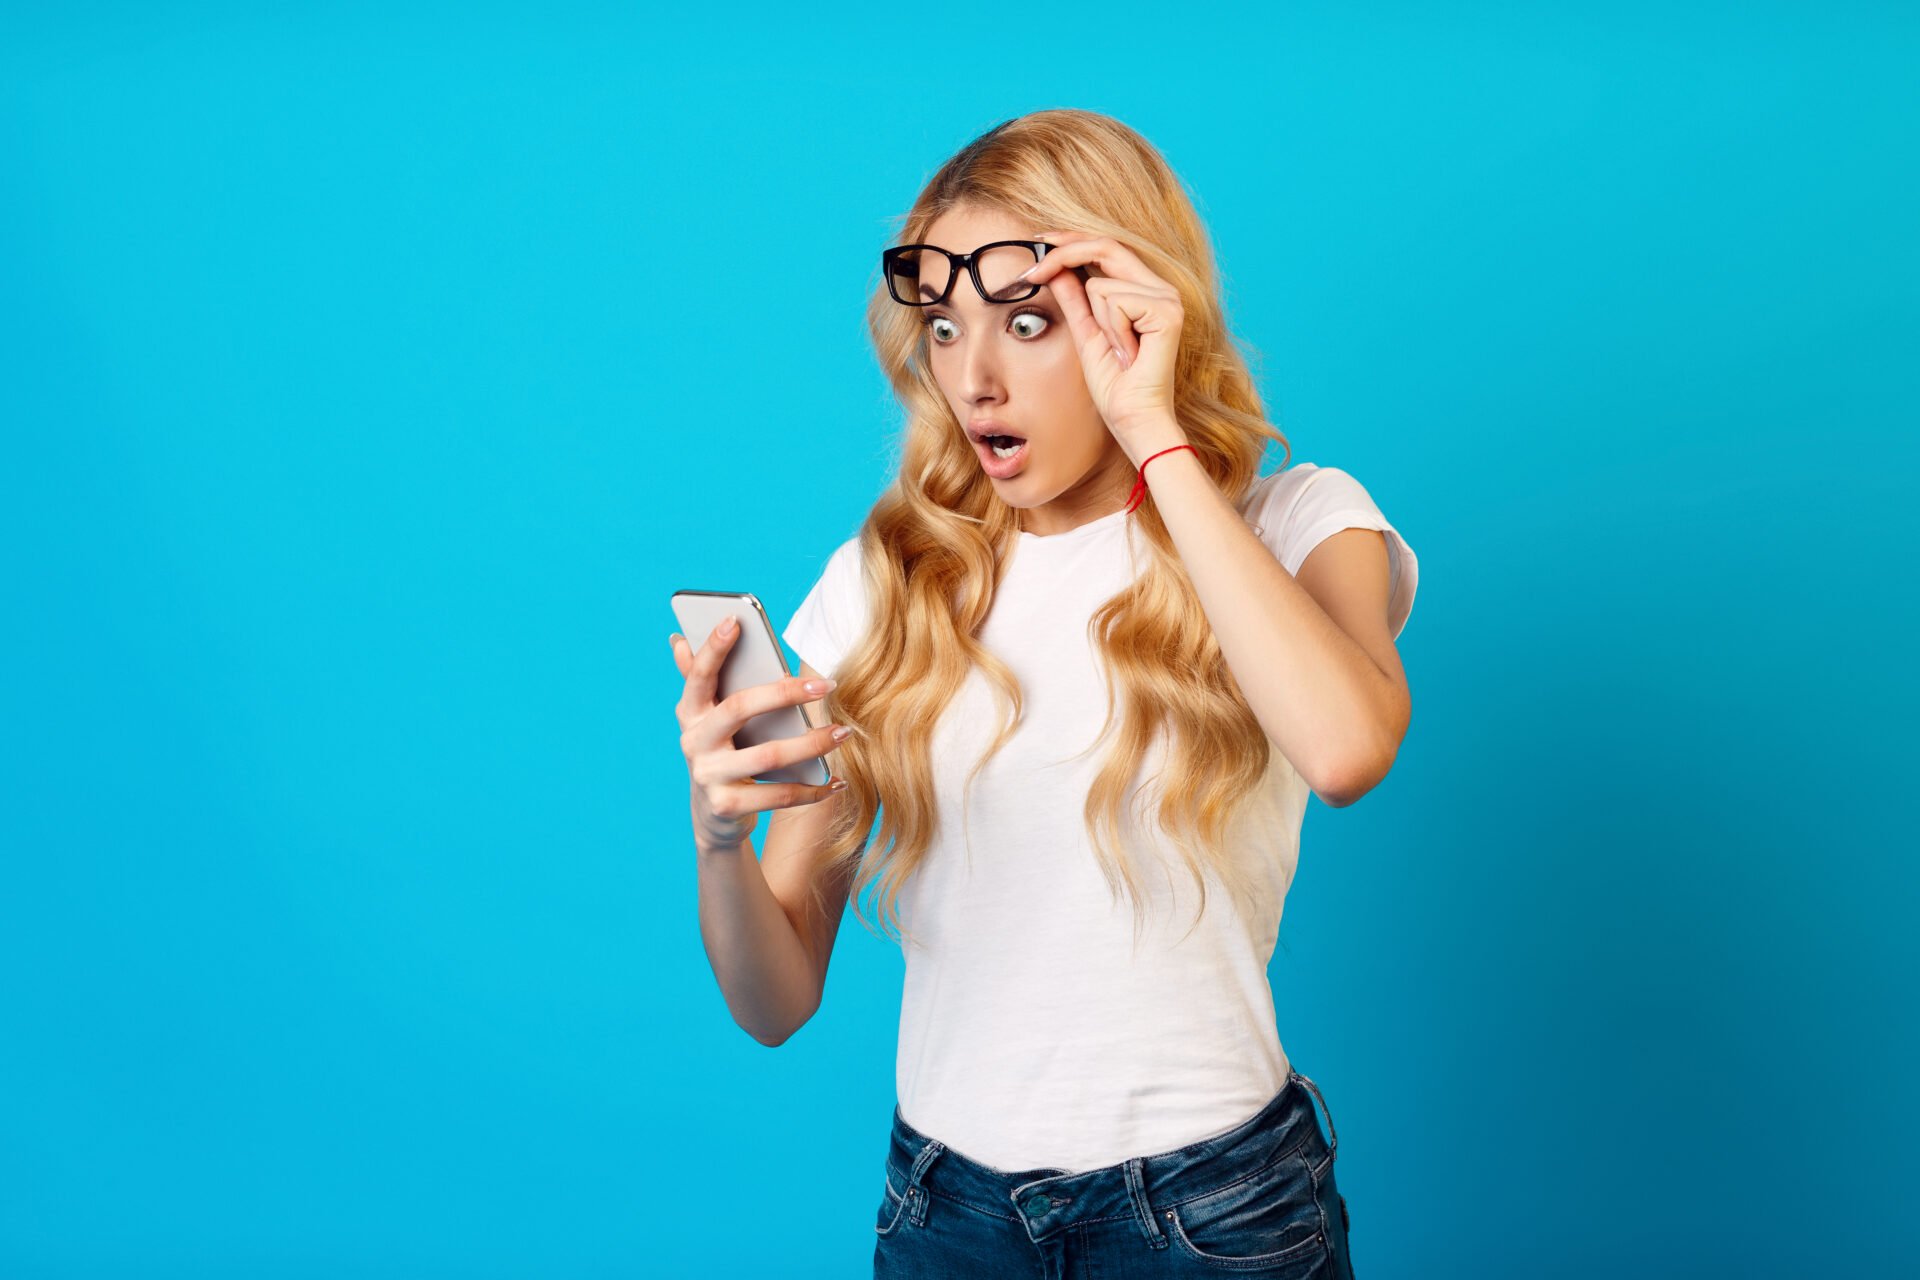 Shock Content. Woman Looking At Smartphone Over Blue Studio Background